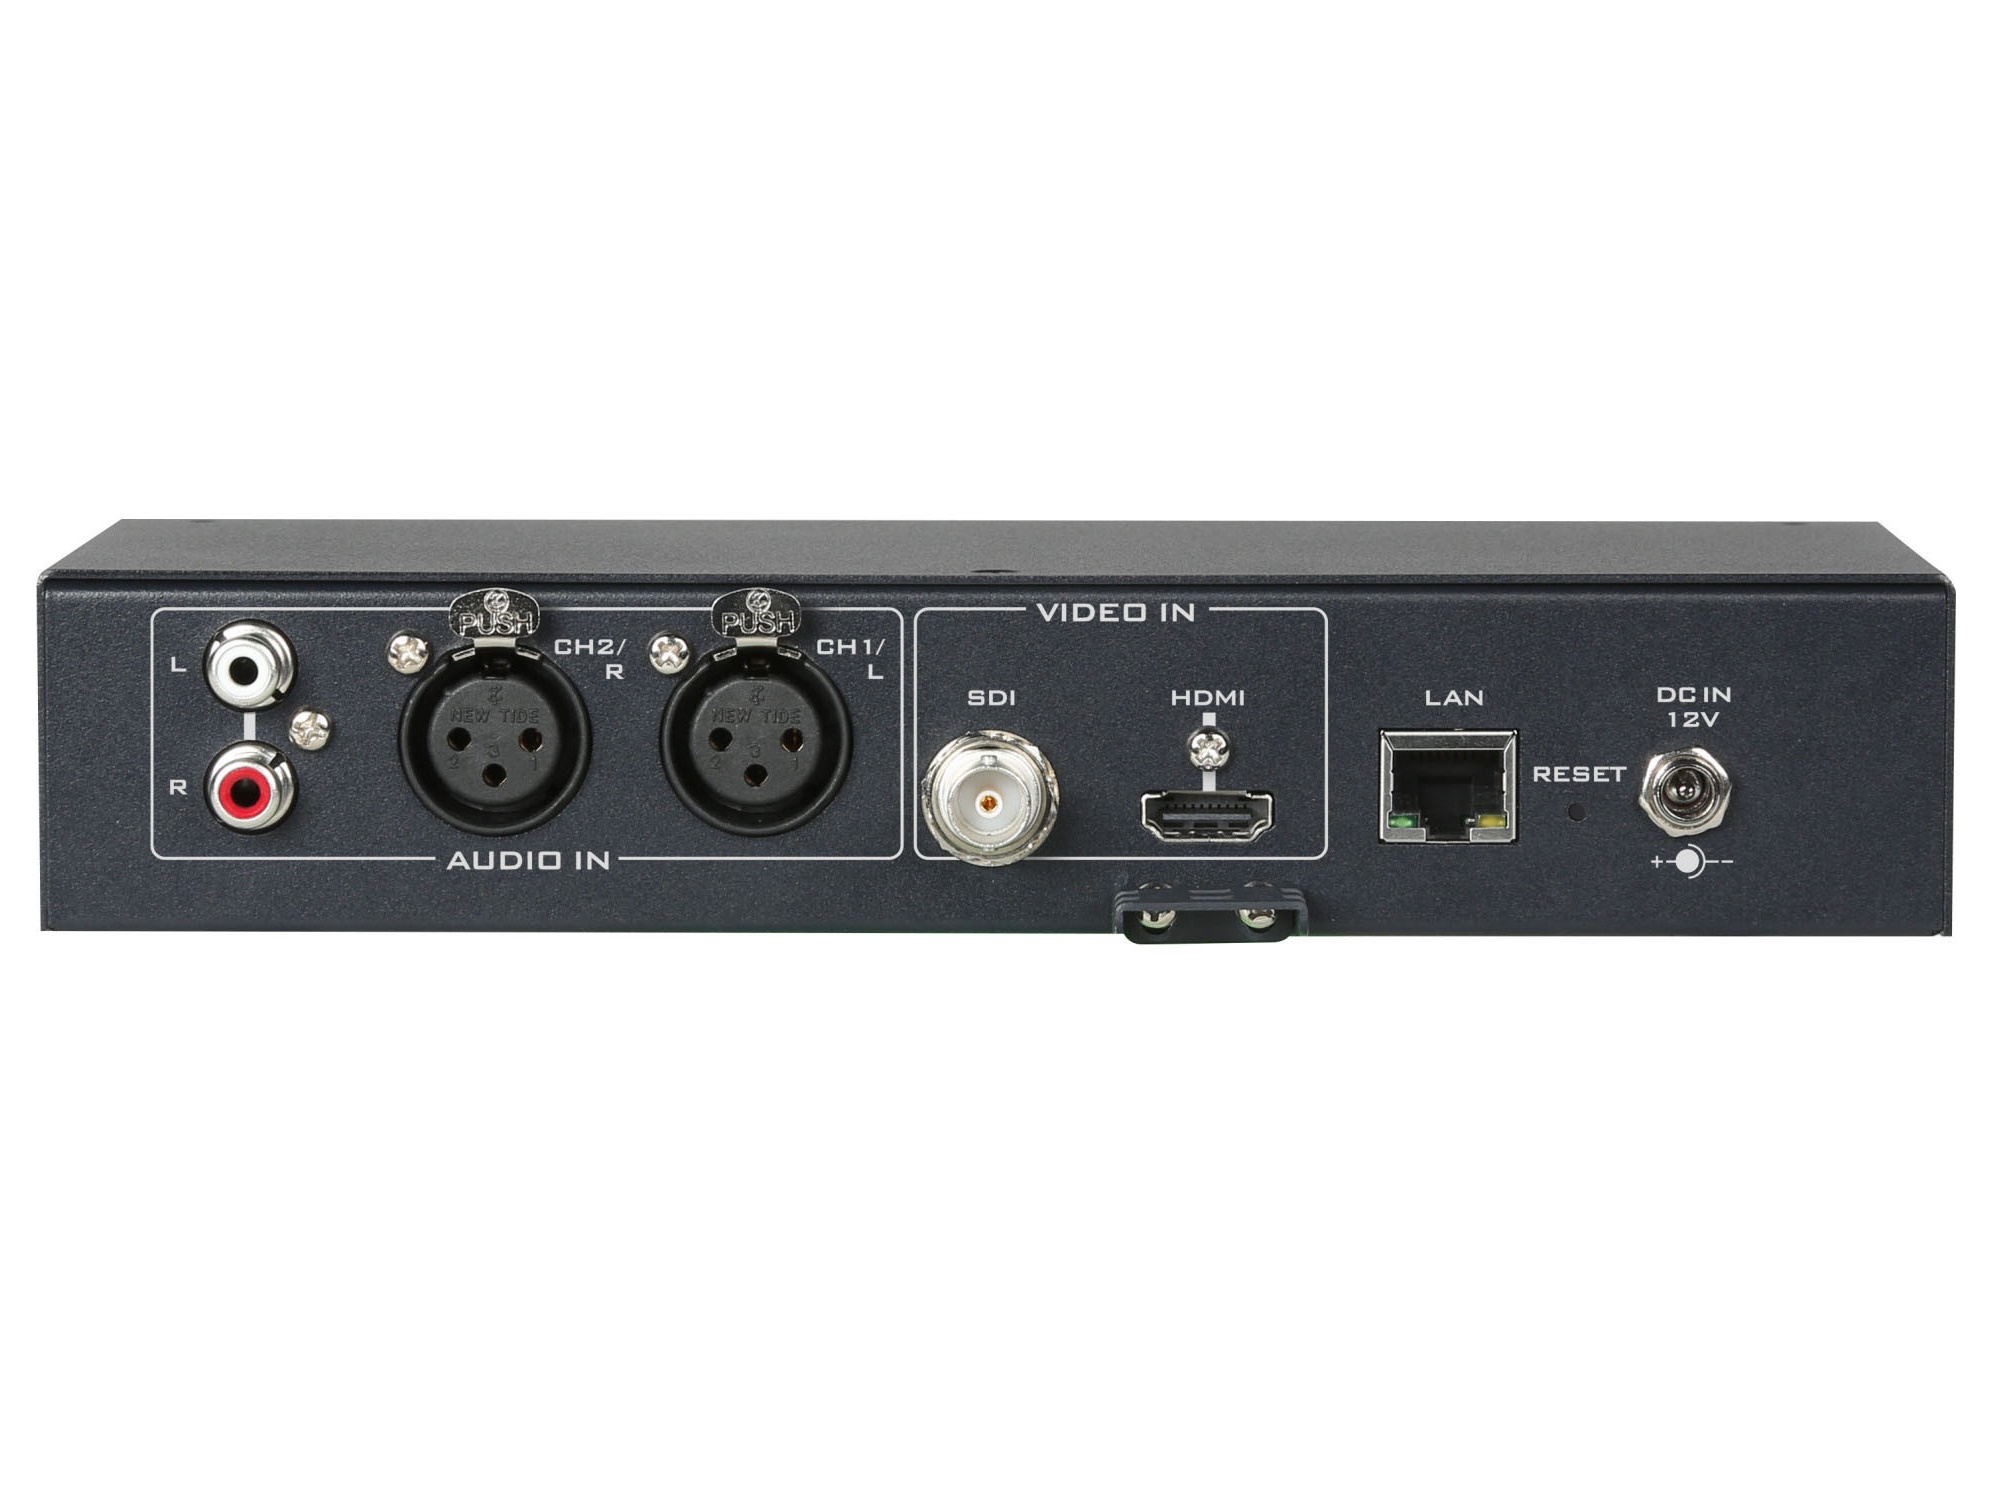 NVS-35 H.264 Dual Streaming Encoder by Datavideo